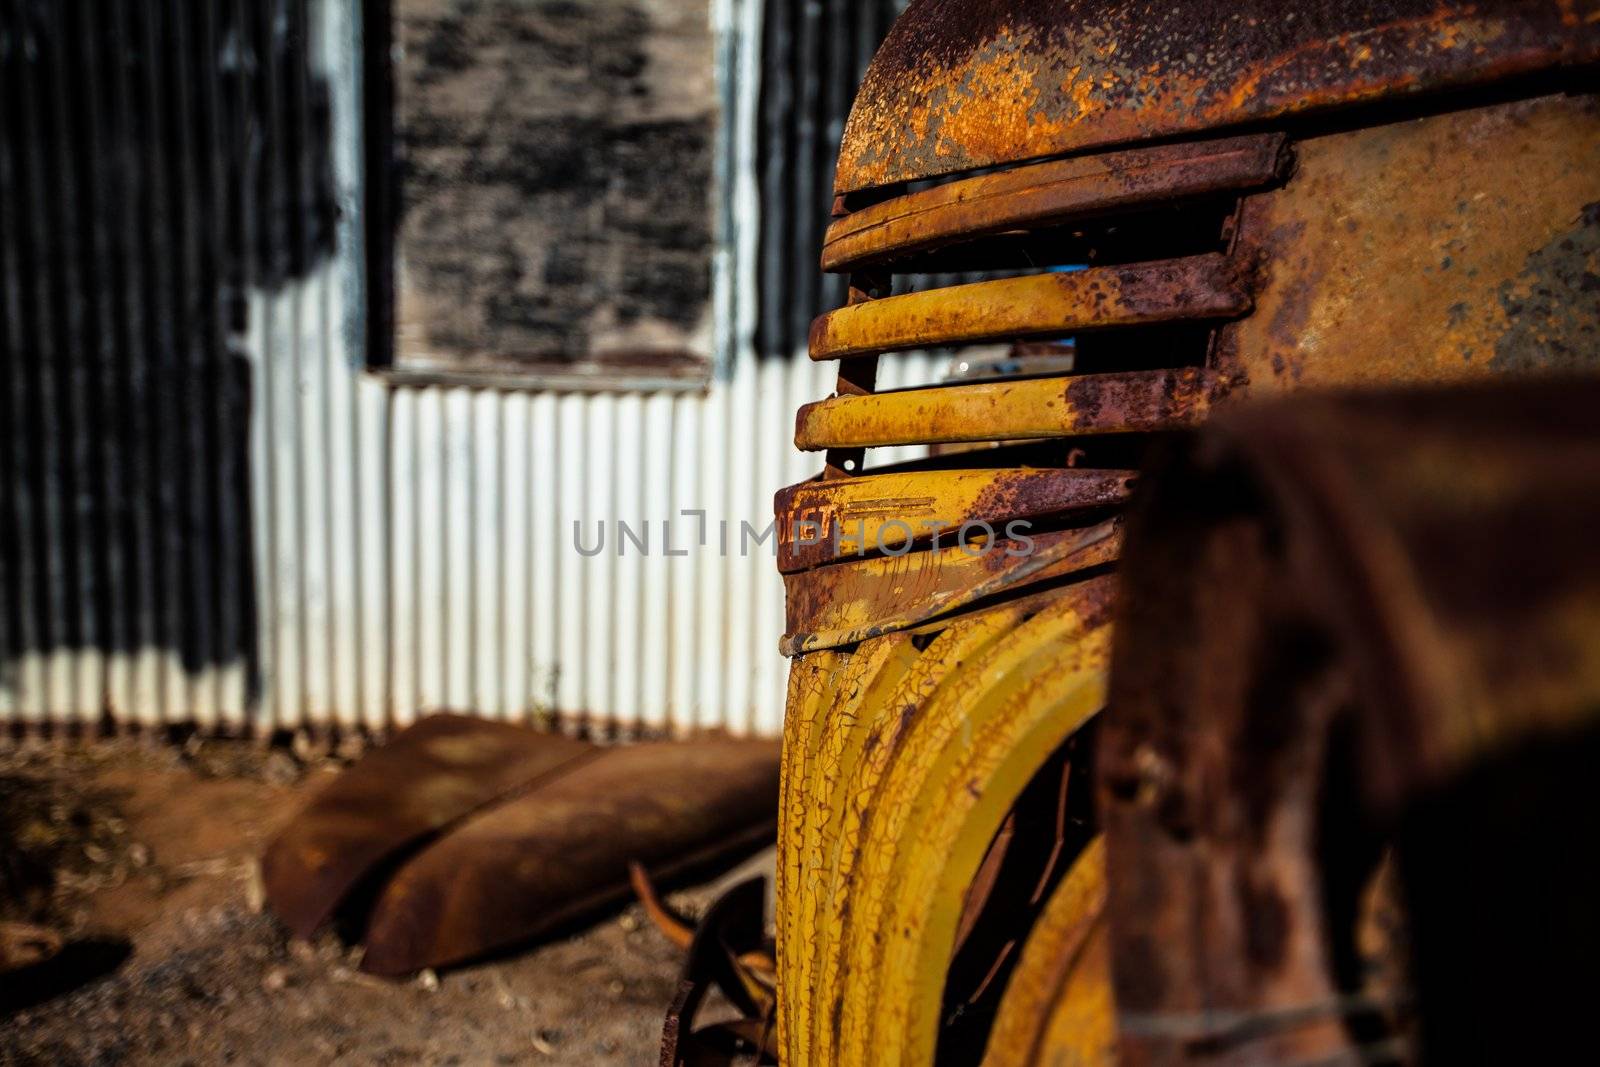 On our way back to Mildura from Wentworth, we came across this old truck parked under an awning rusting away with time.